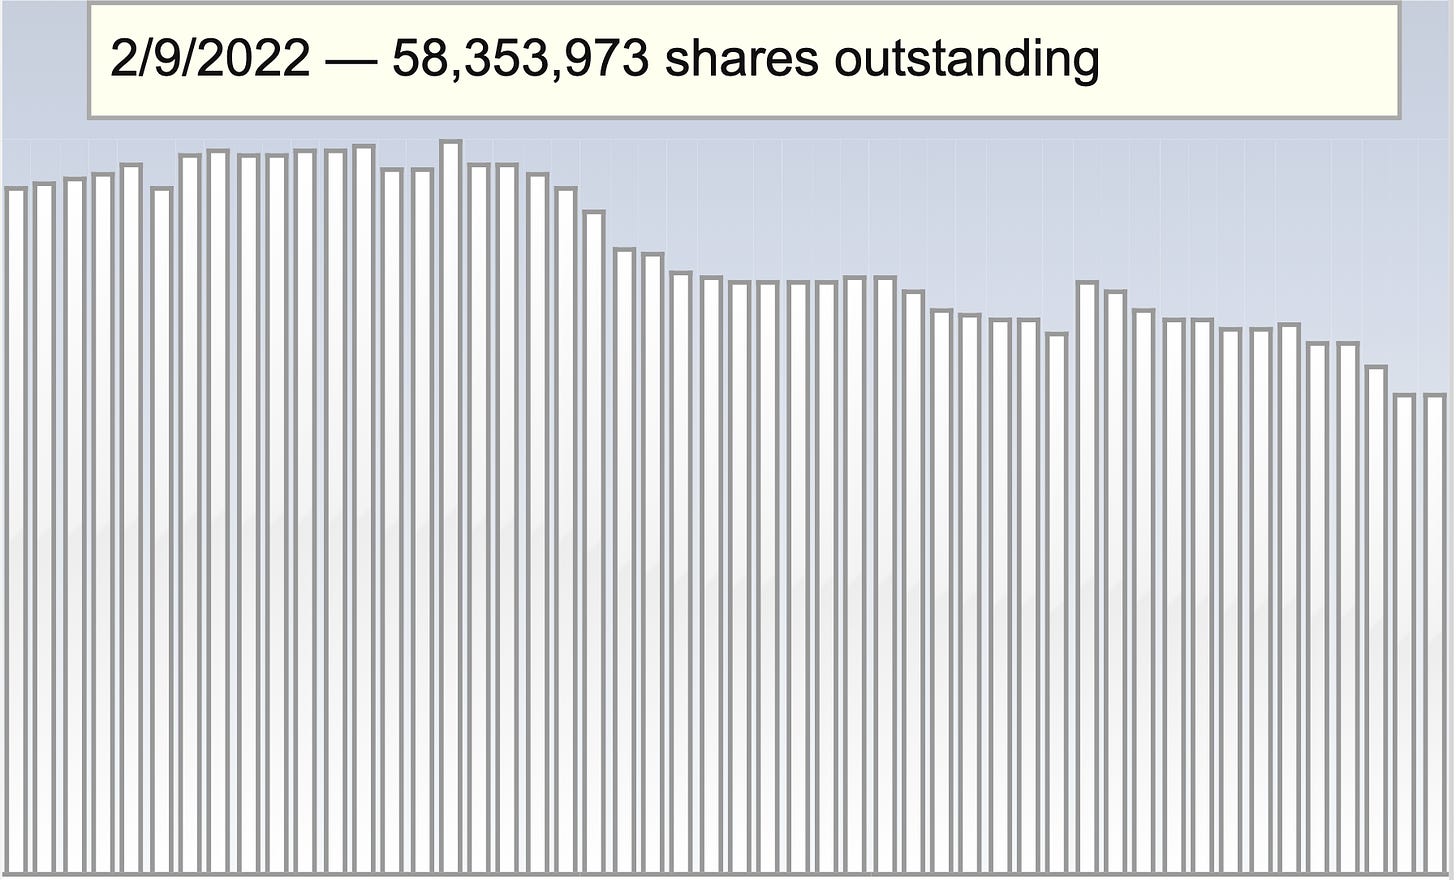 CROX Shares outstanding